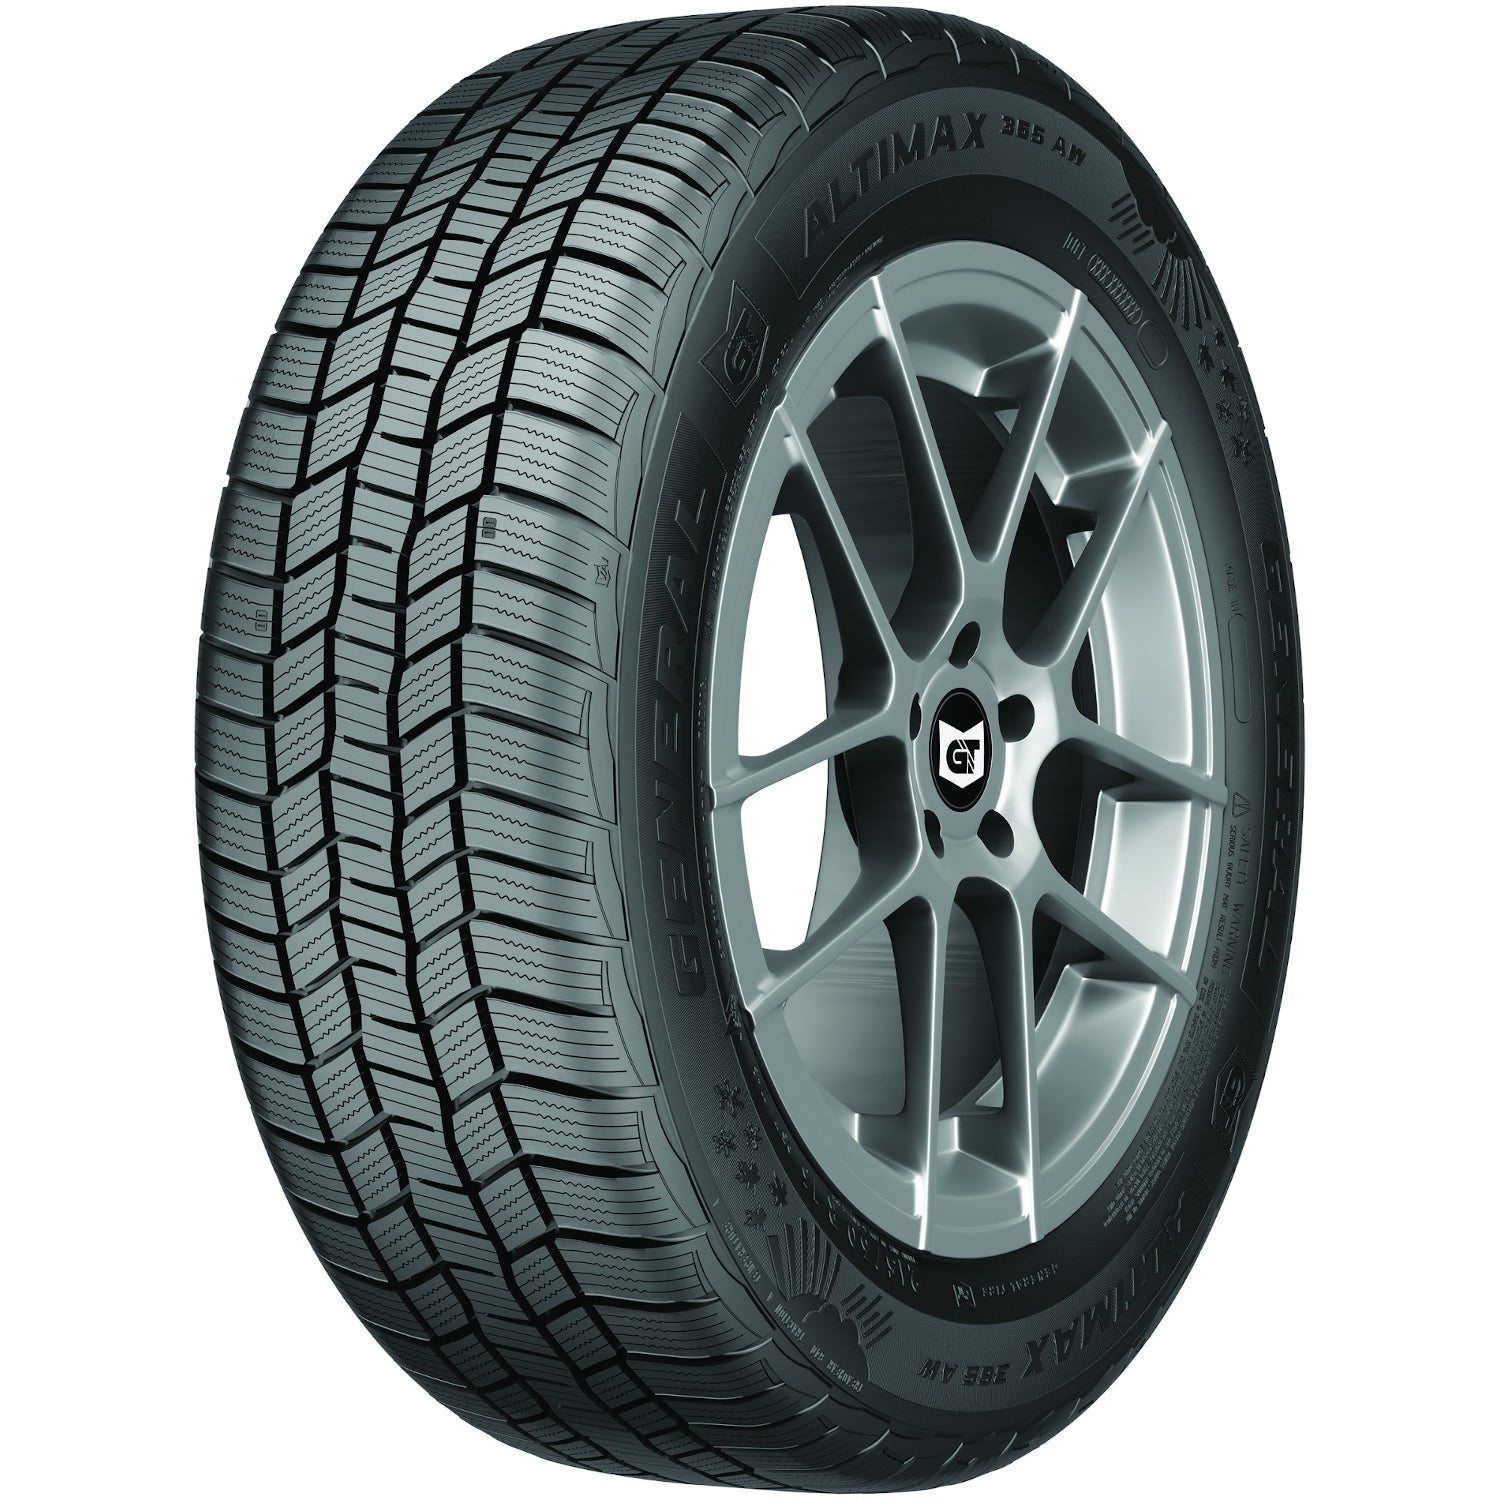 GENERAL ALTIMAX 365AW 225/50R18 (26.9X8.9R 18) Tires